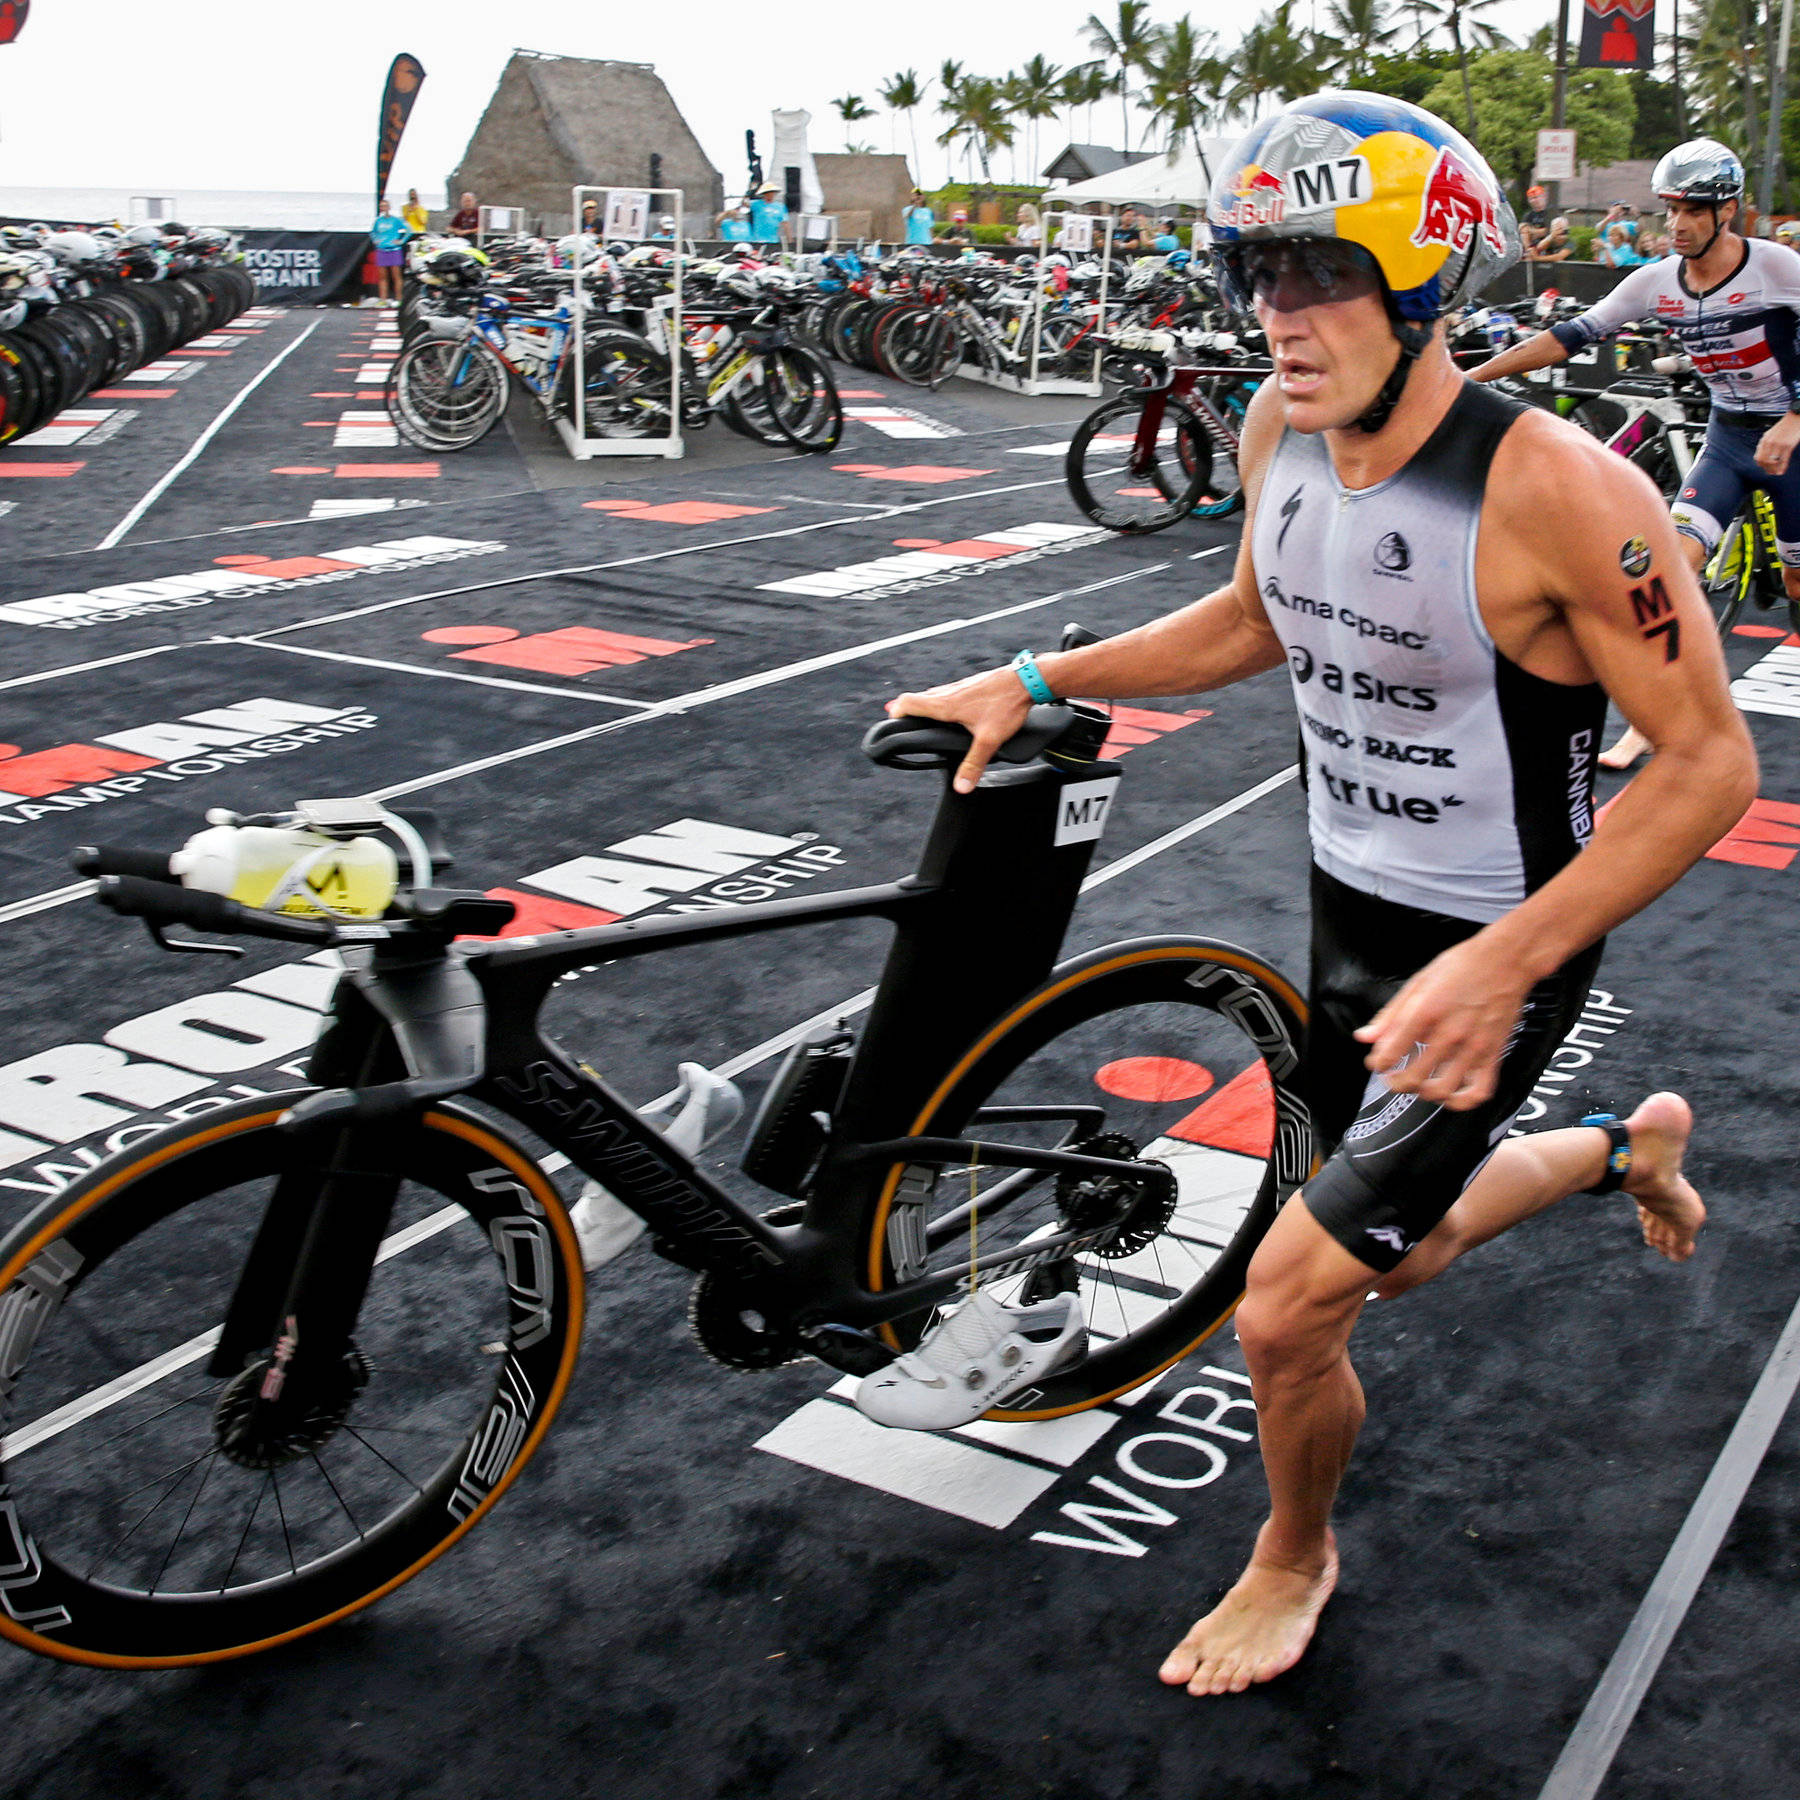 Barefooted Athlete During The Triathlon Wallpaper